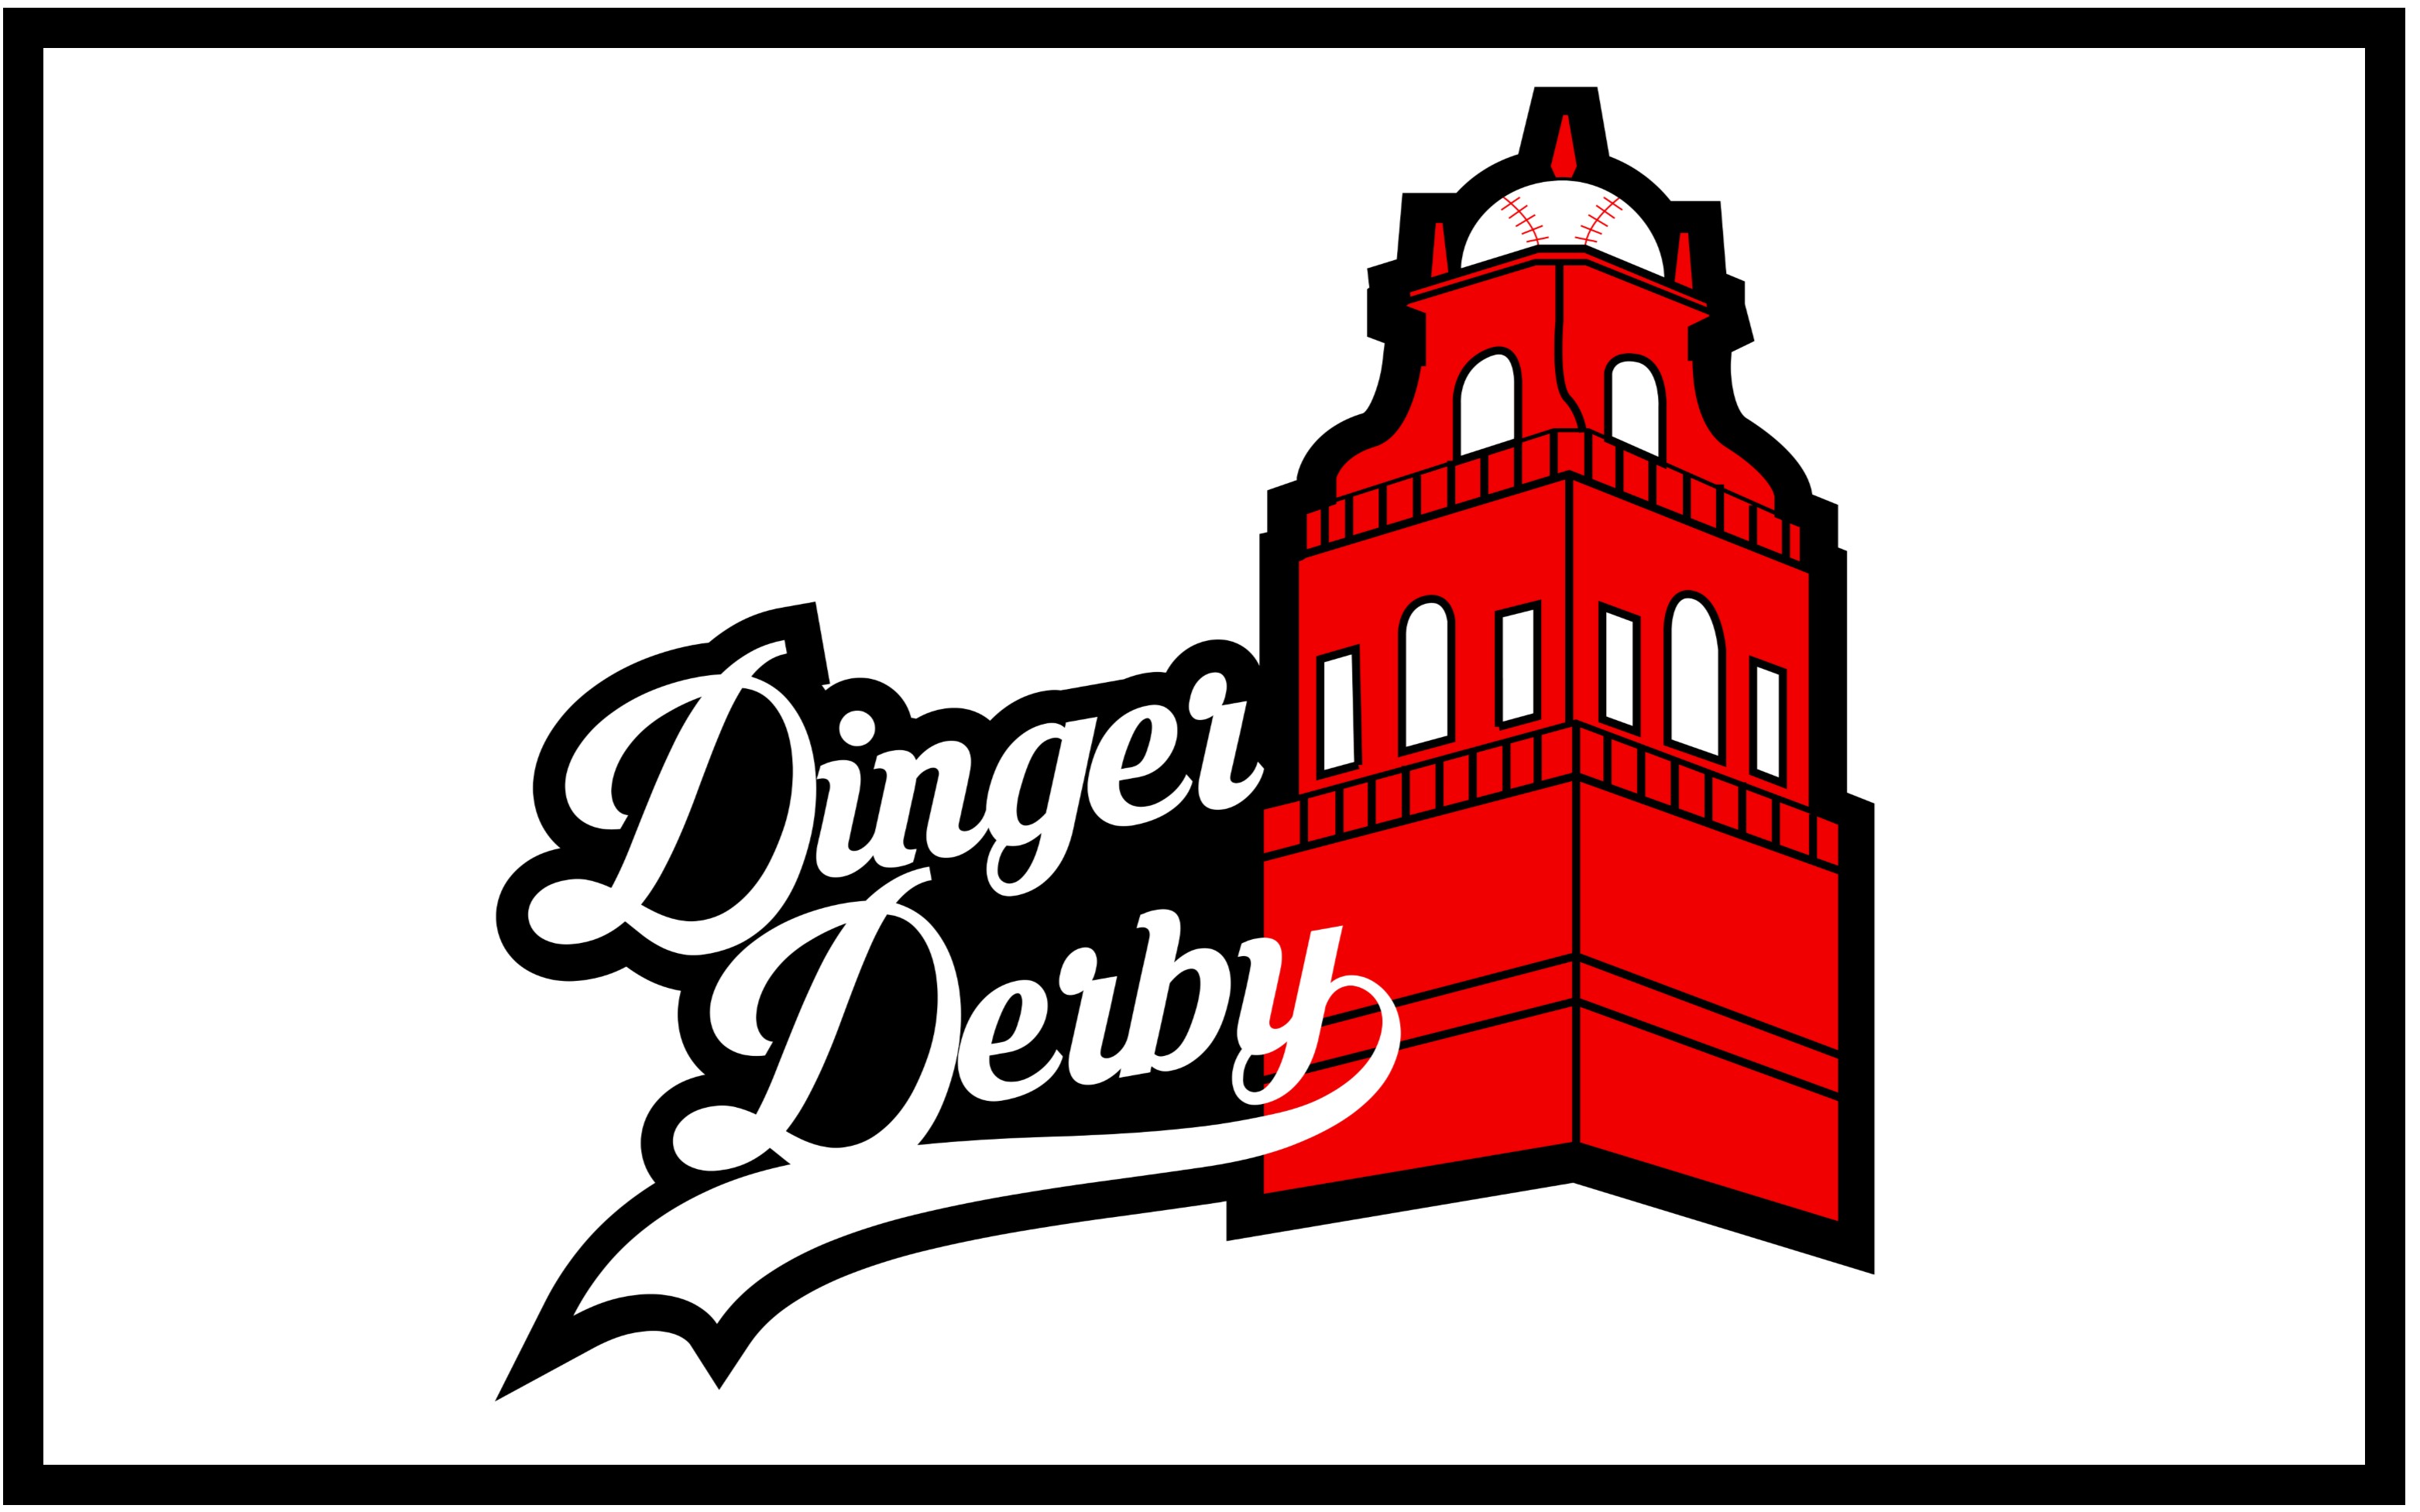 Introducing Dinger Derby: A Podcast About Texas Tech Baseball